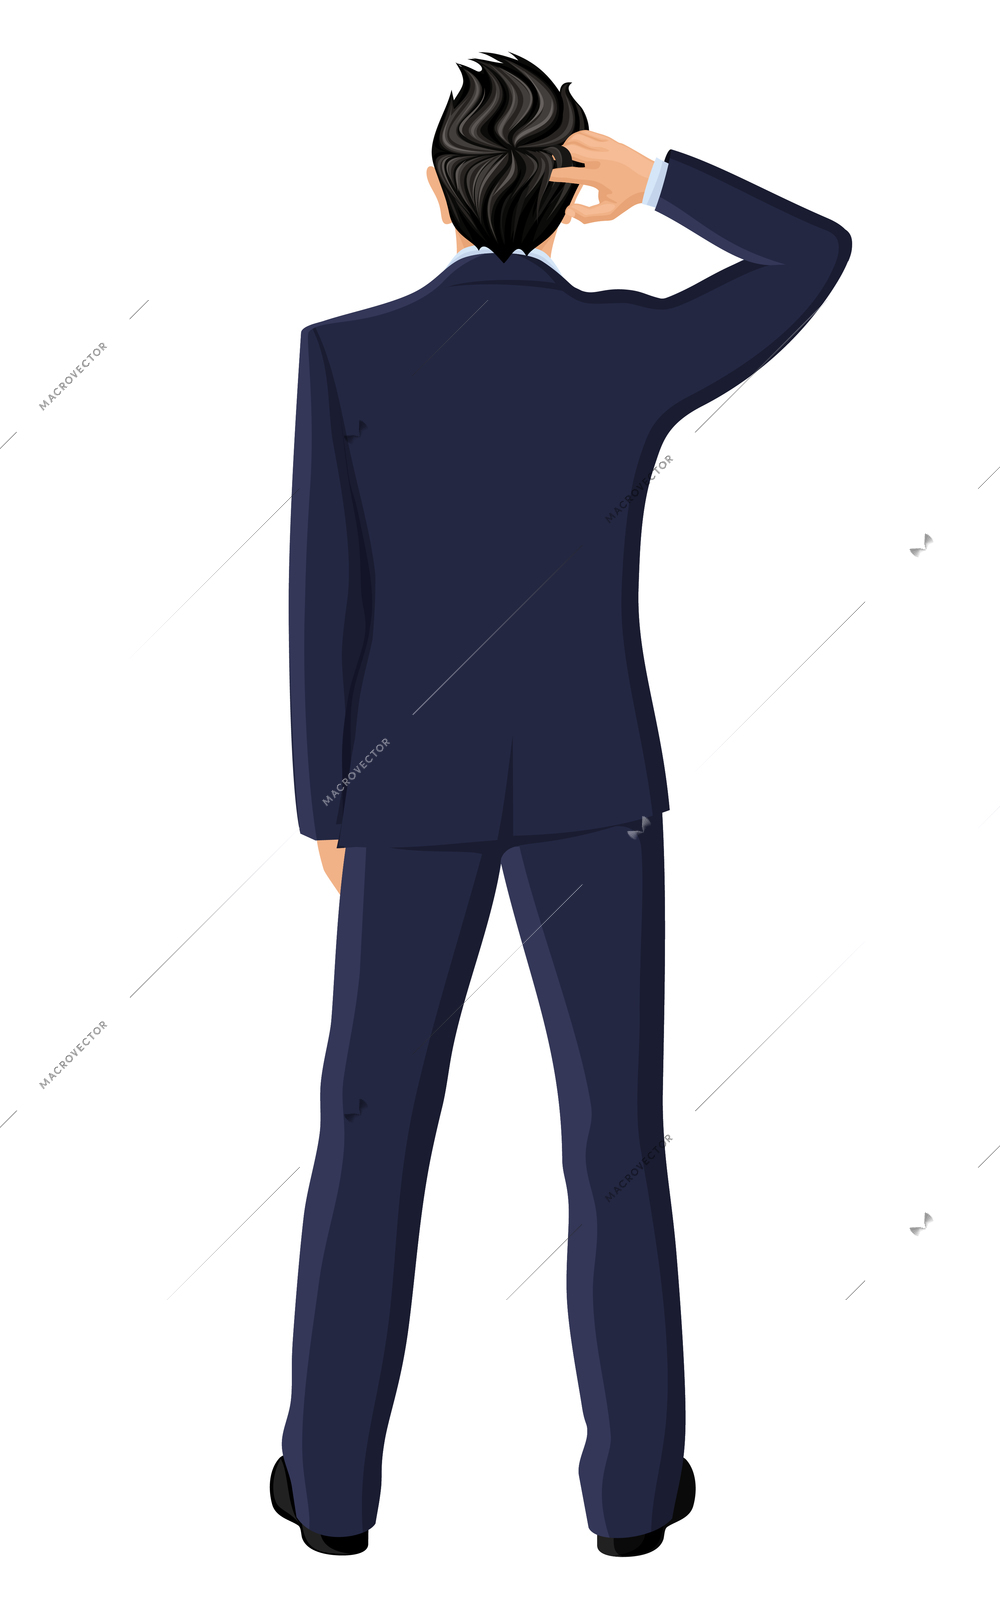 Businessman with hand in hair thinking full length back view portrait isolated on white background vector illustration